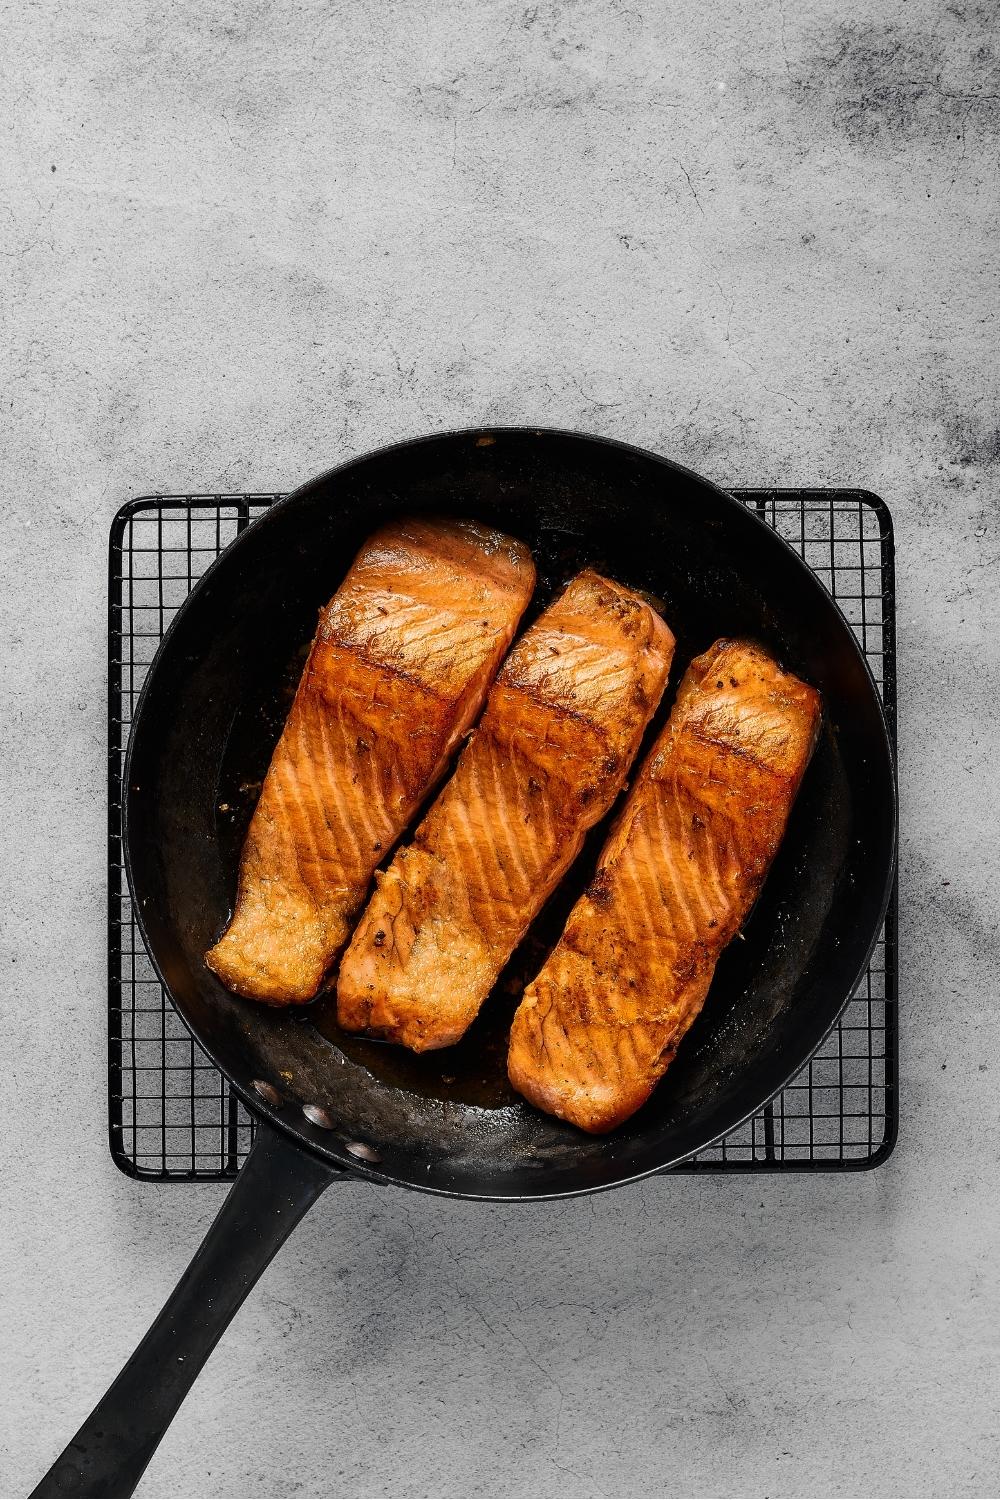 Black skillet filled with three salmon fillets. The skillet is on a wire rack on a gray counter.